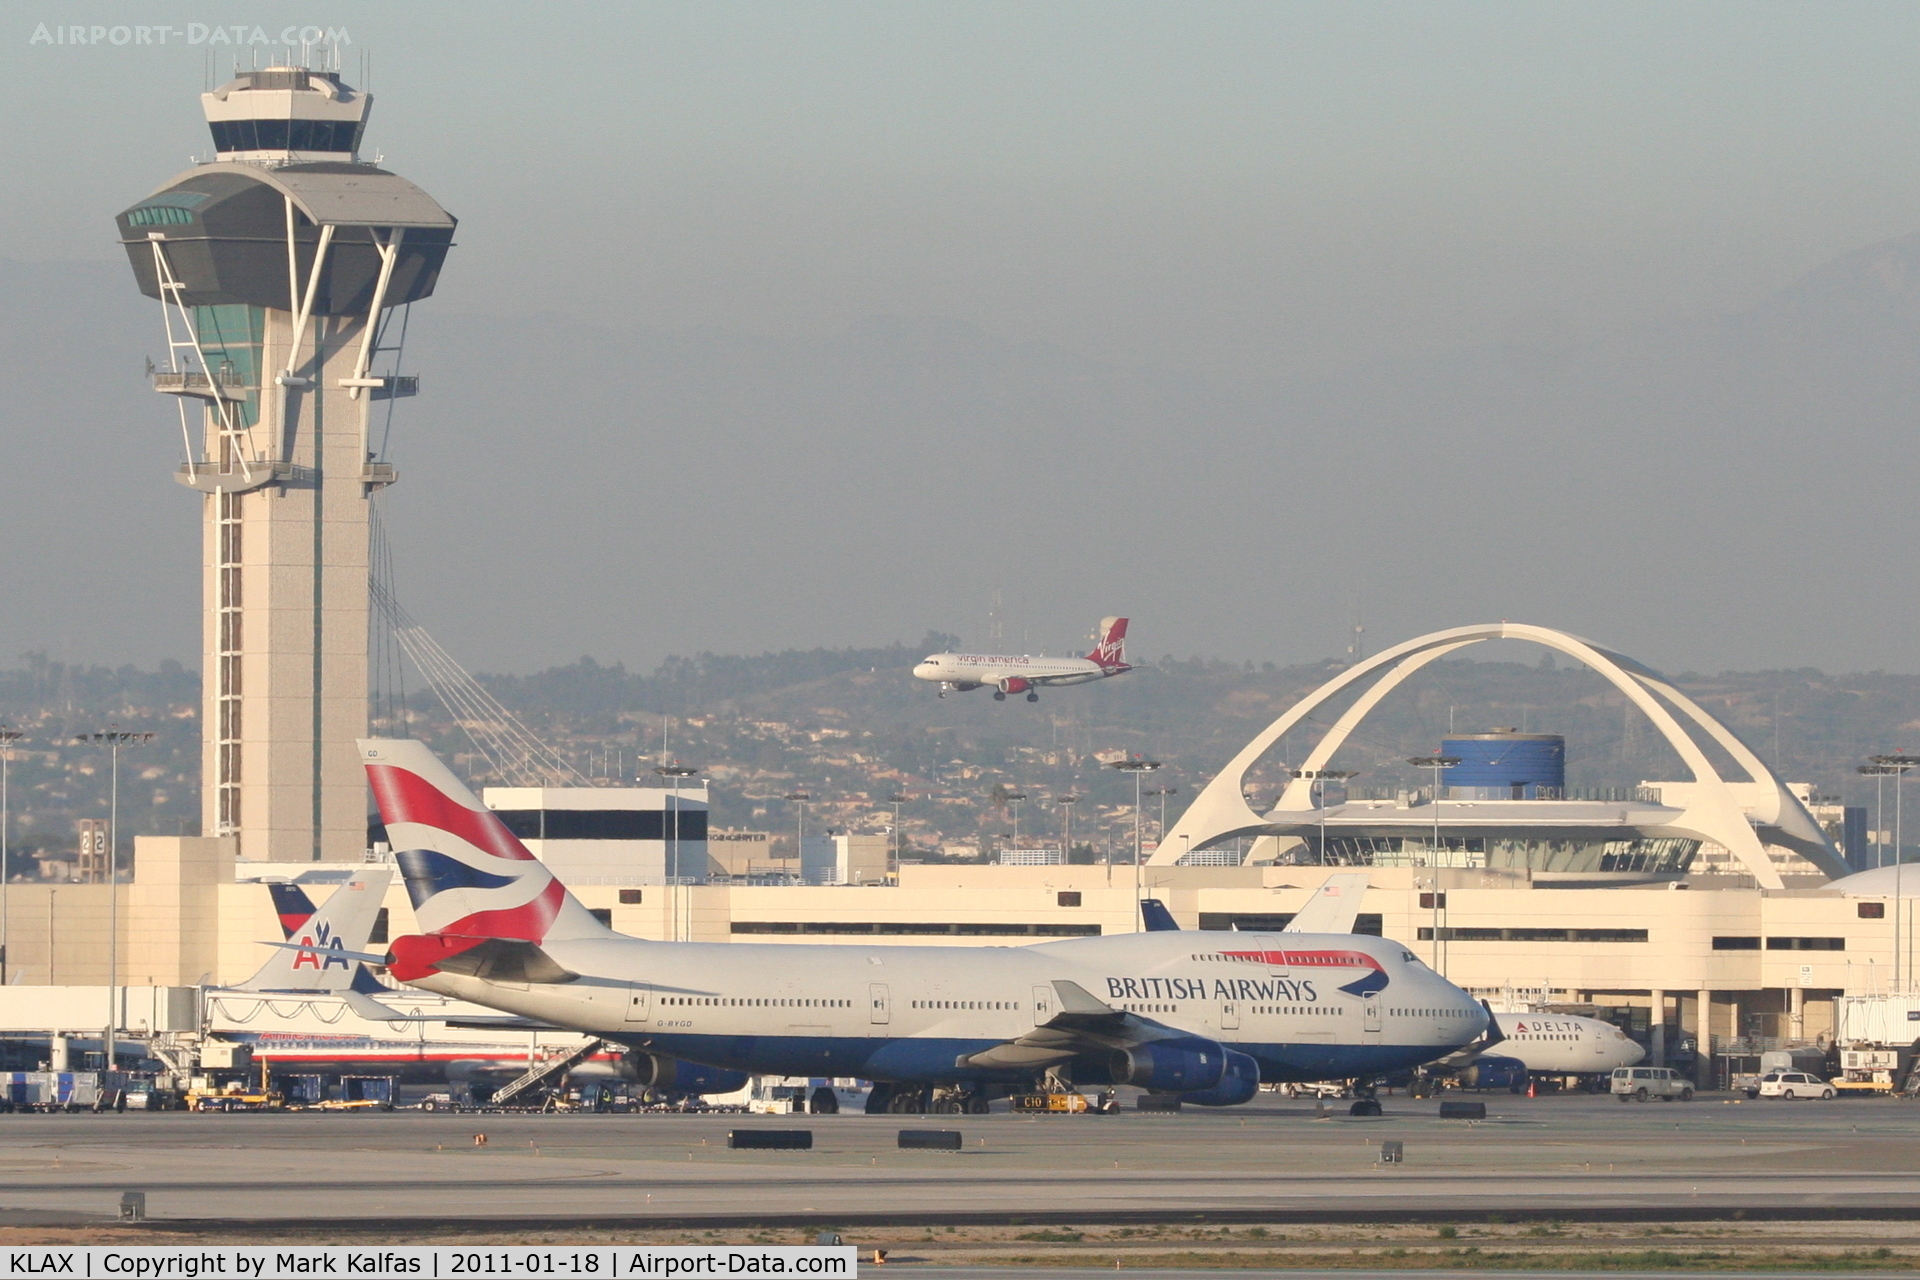 Los Angeles International Airport (LAX) - BA 744 taxiing out on the south complex with a VA A320 landing on the north side.